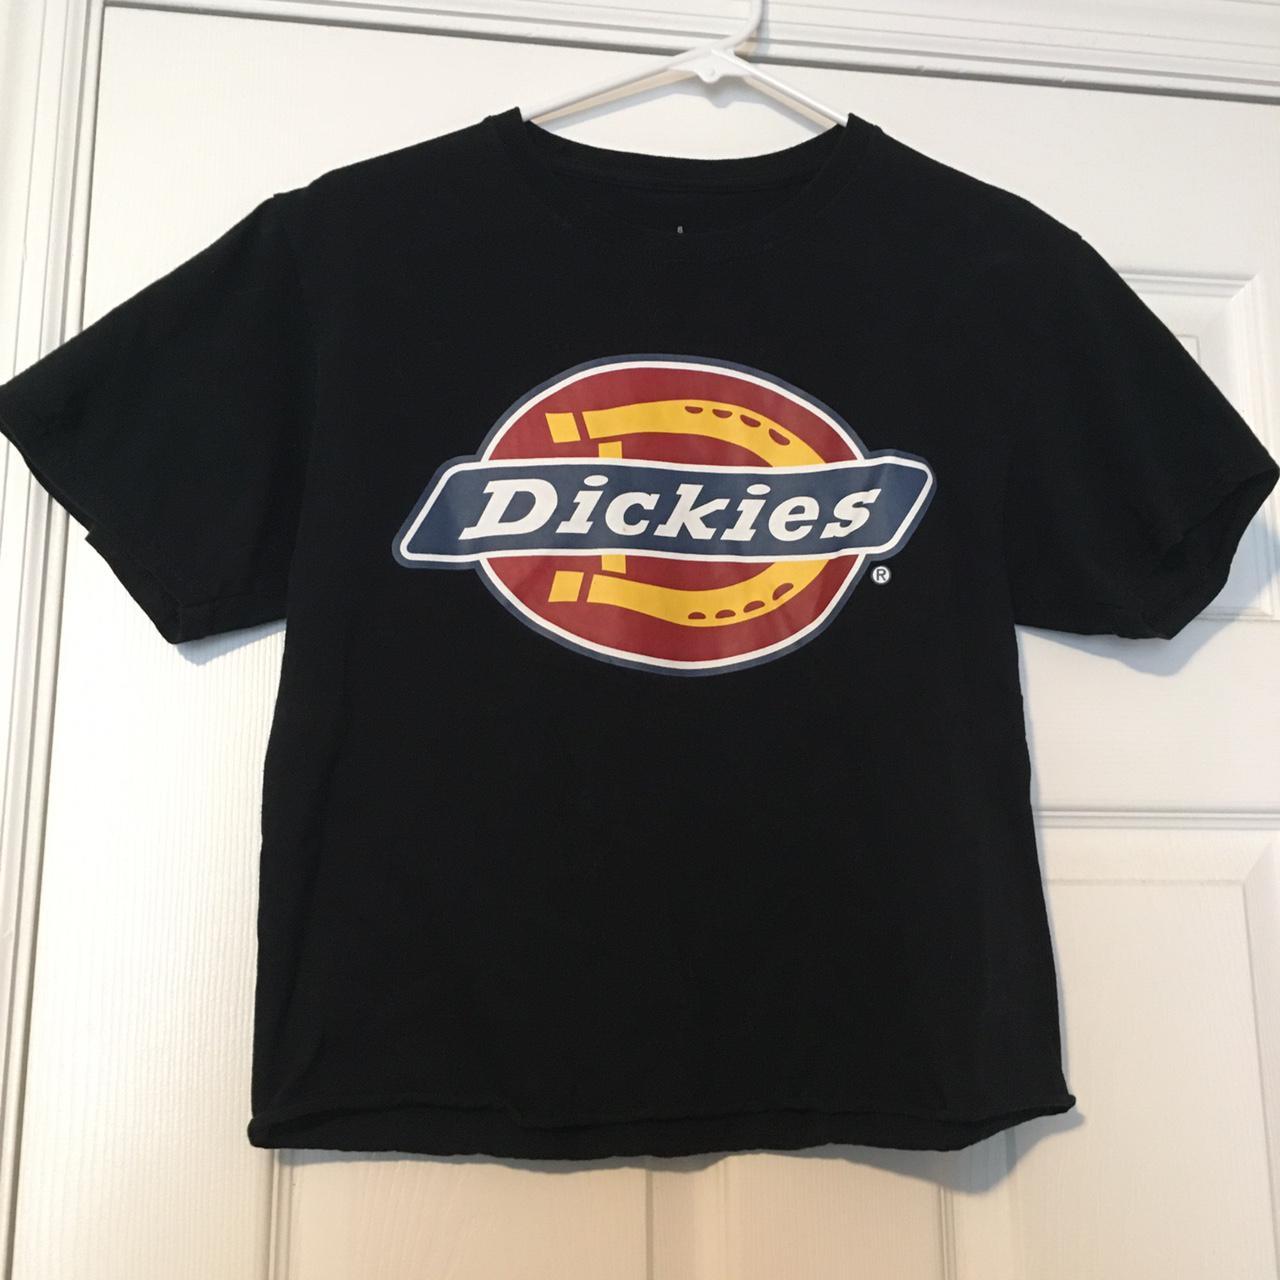 Product Image 1 - dickies graphic tee
- measurements laying